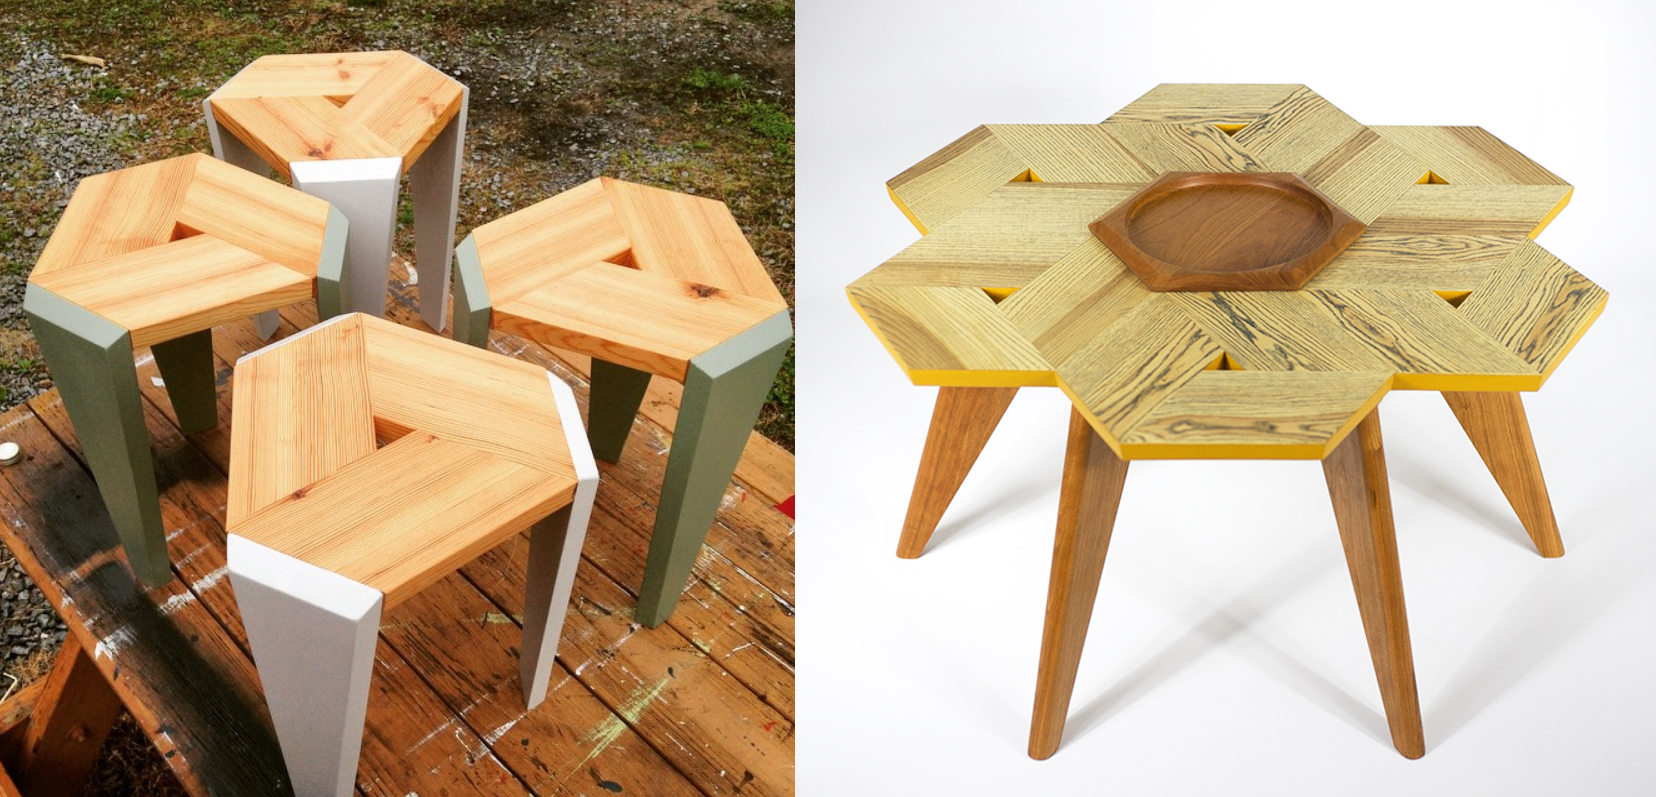 wooden stool and table designs that both incorporate a central hexagon of wood.